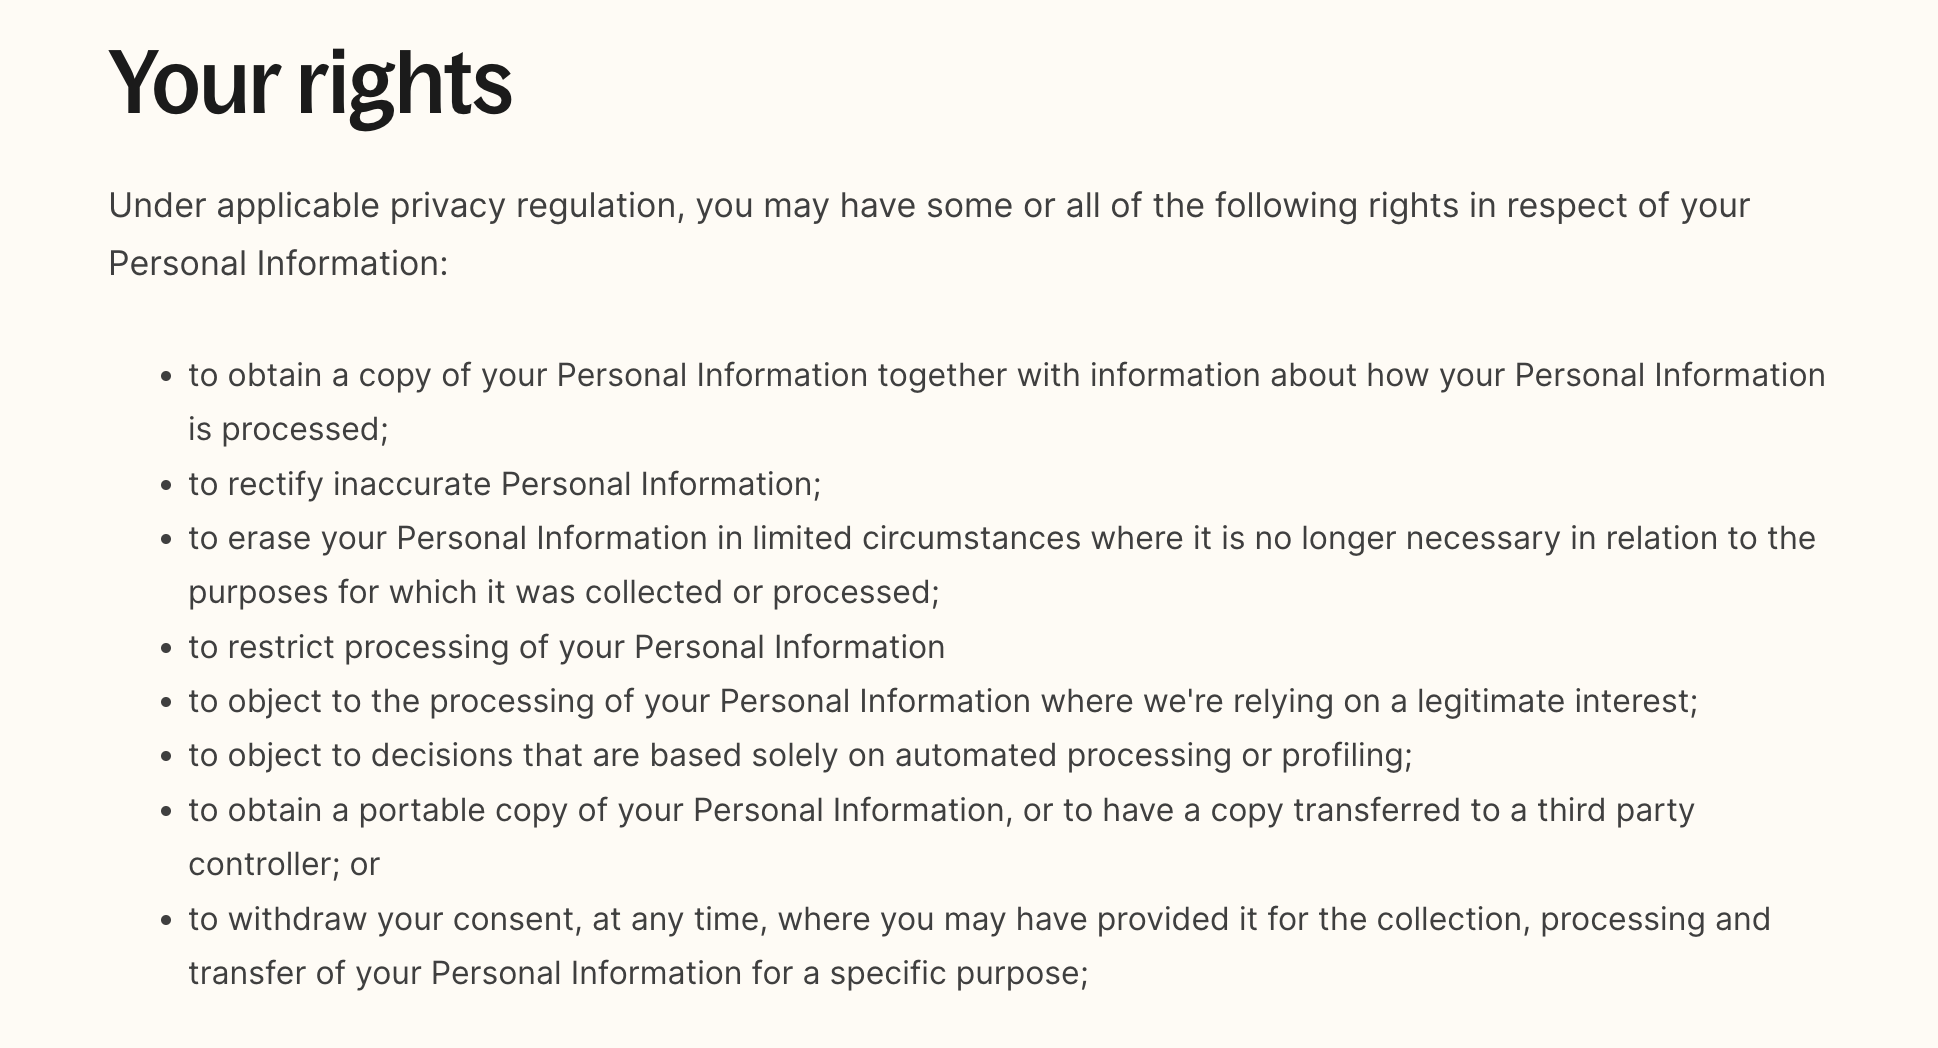 Your rights - privacy policy